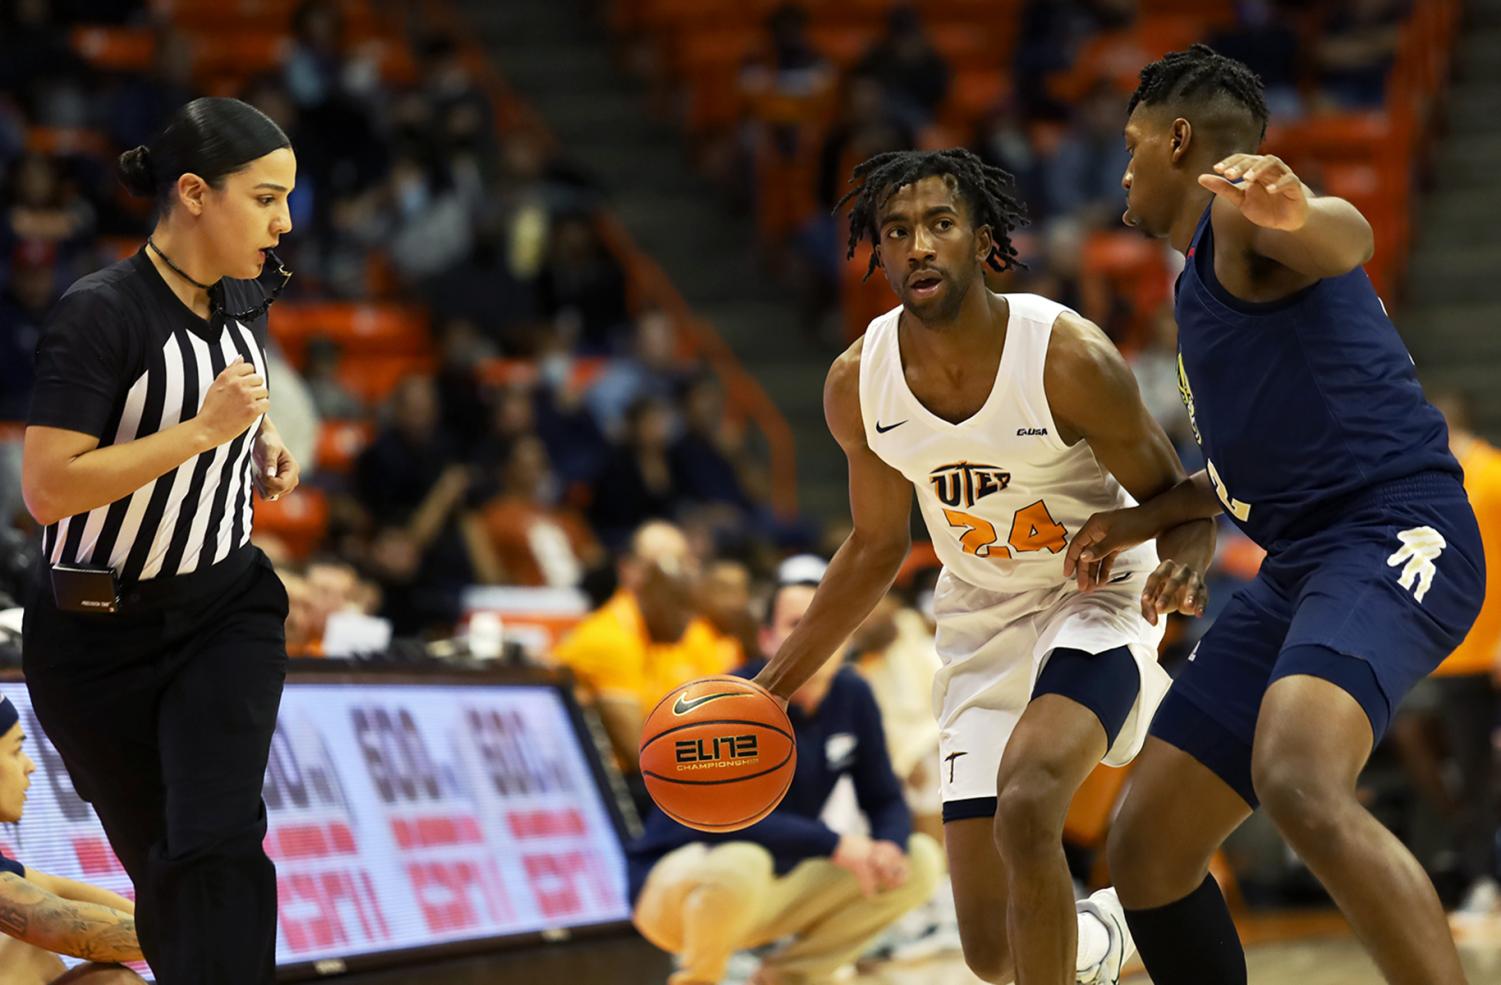 Miners+beat+FIU+for+fifth+straight+win